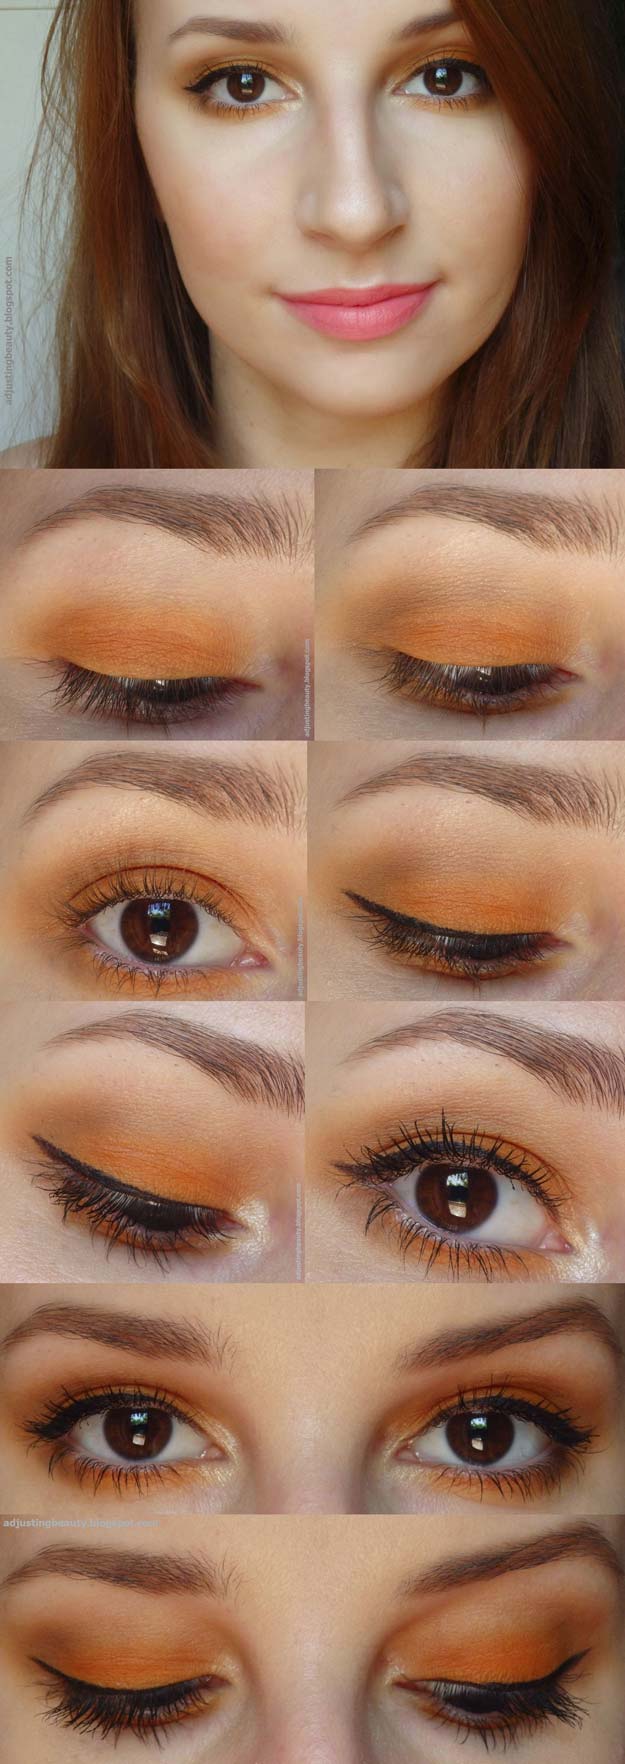 Best Eyeshadow Tutorials - Orange Eye Makeup - Easy Step by Step How To For Eye Shadow - Cool Makeup Tricks and Eye Makeup Tutorial With Instructions - Quick Ways to Do Smoky Eye, Natural Makeup, Looks for Day and Evening, Brown and Blue Eyes - Cool Ideas for Beginners and Teens 